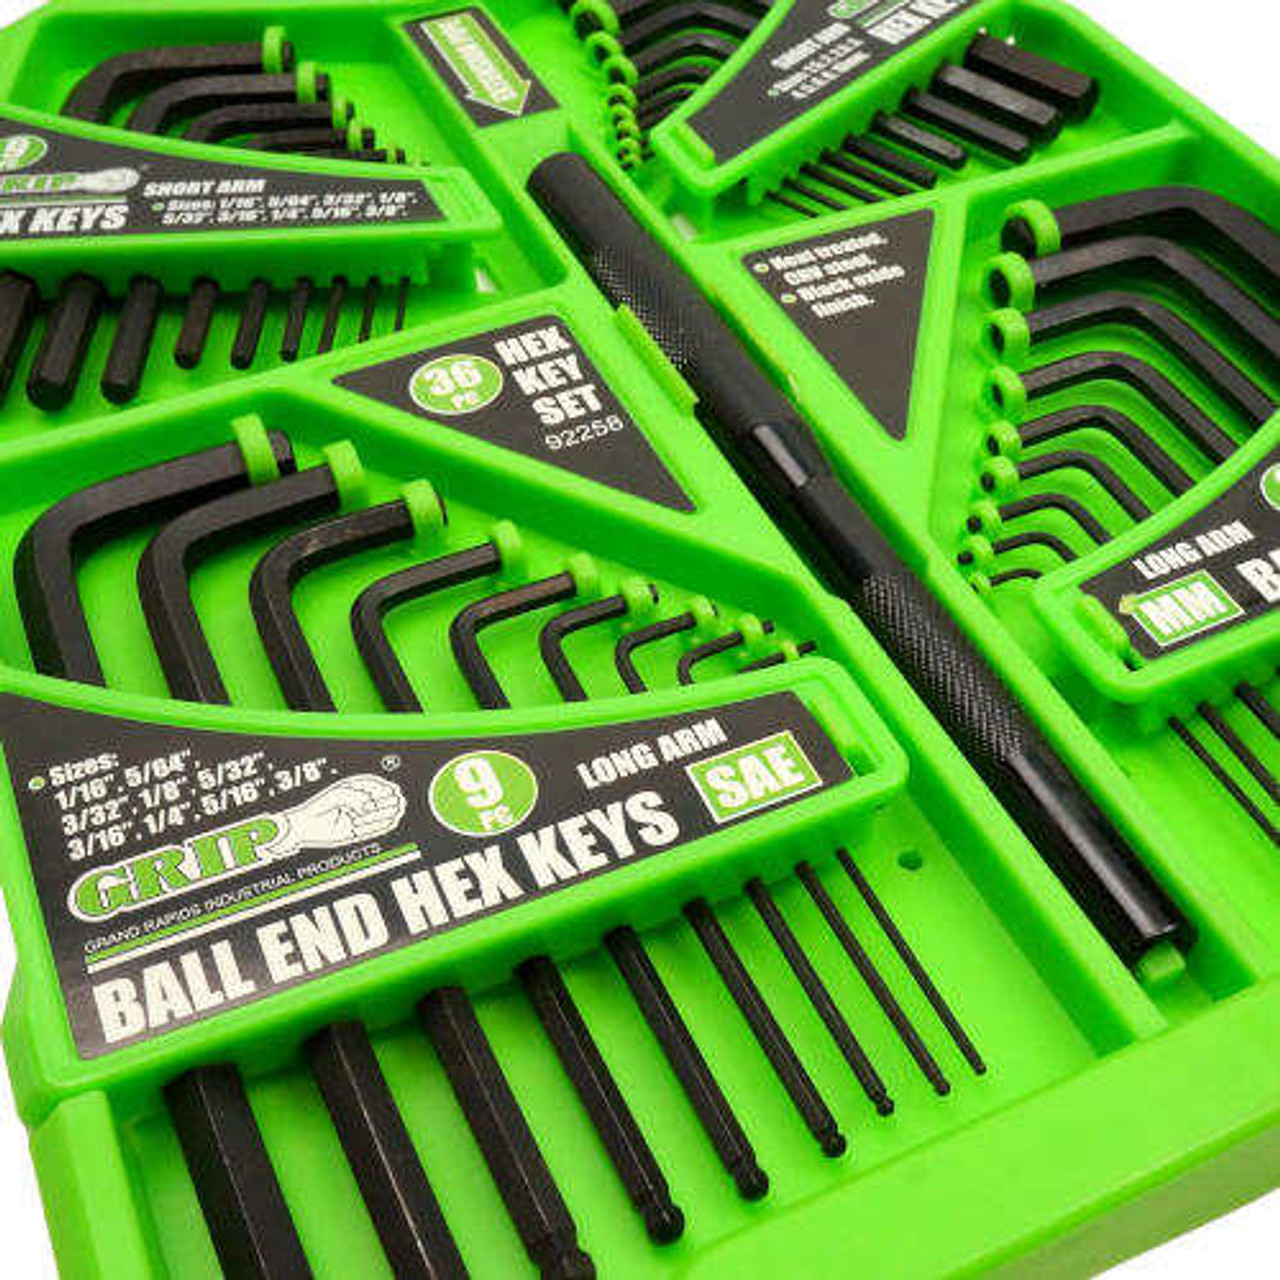 Allen Wrench Sizes: Everything You Need to Know